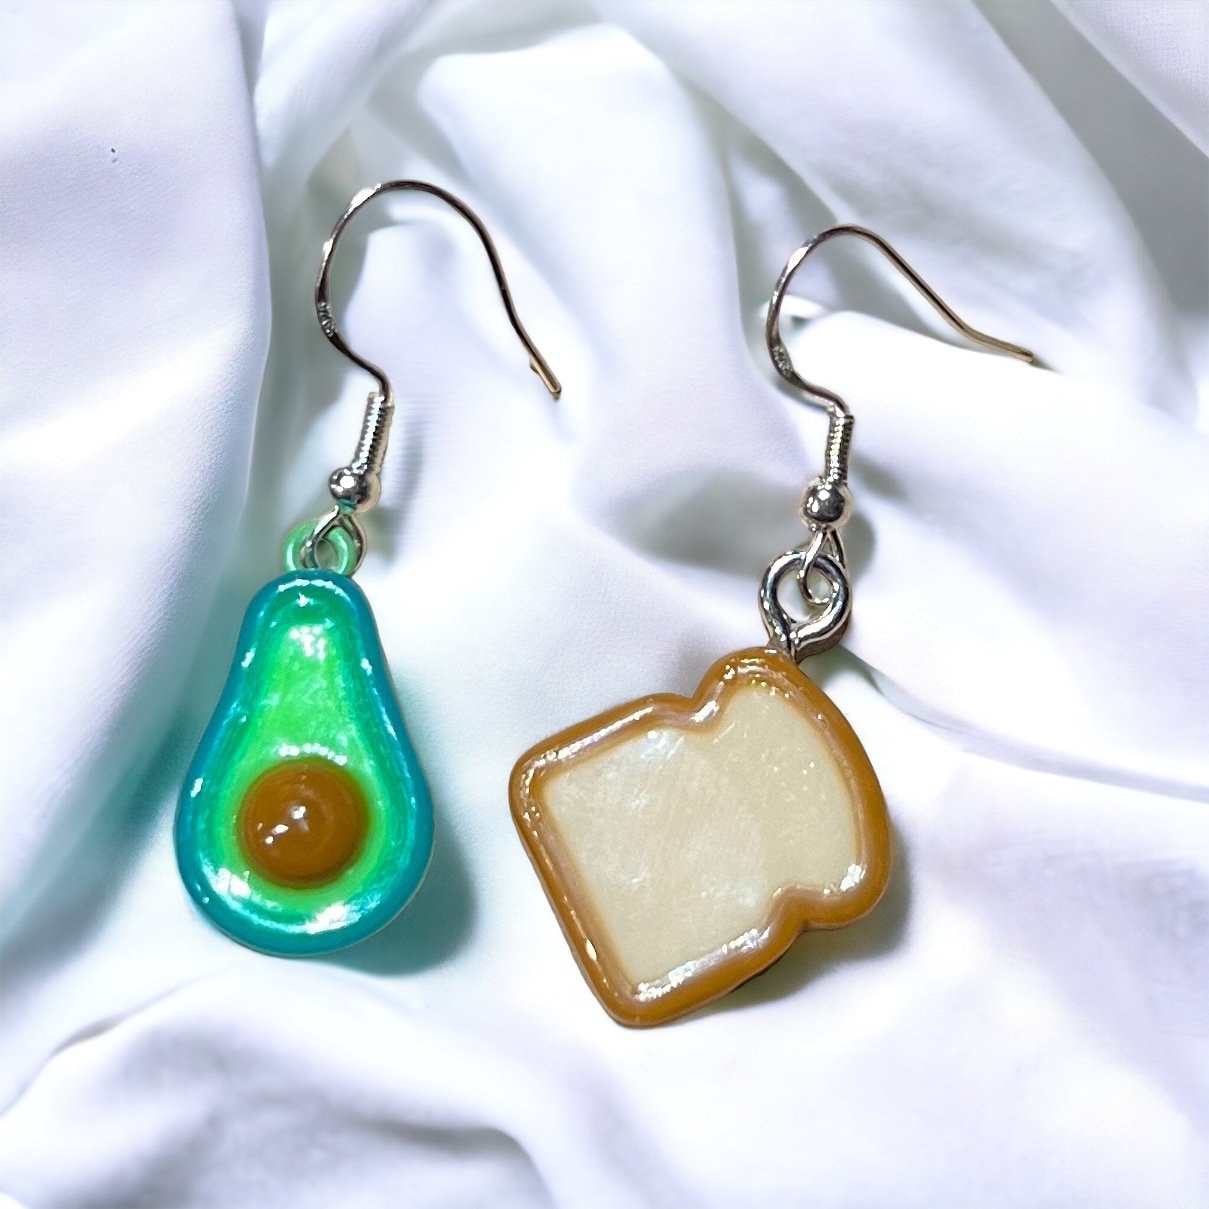 Close-up of Brunch Mini Food Earrings featuring cute Avocado Toast charms. Quirky and delightful accessories for foodie fashion.